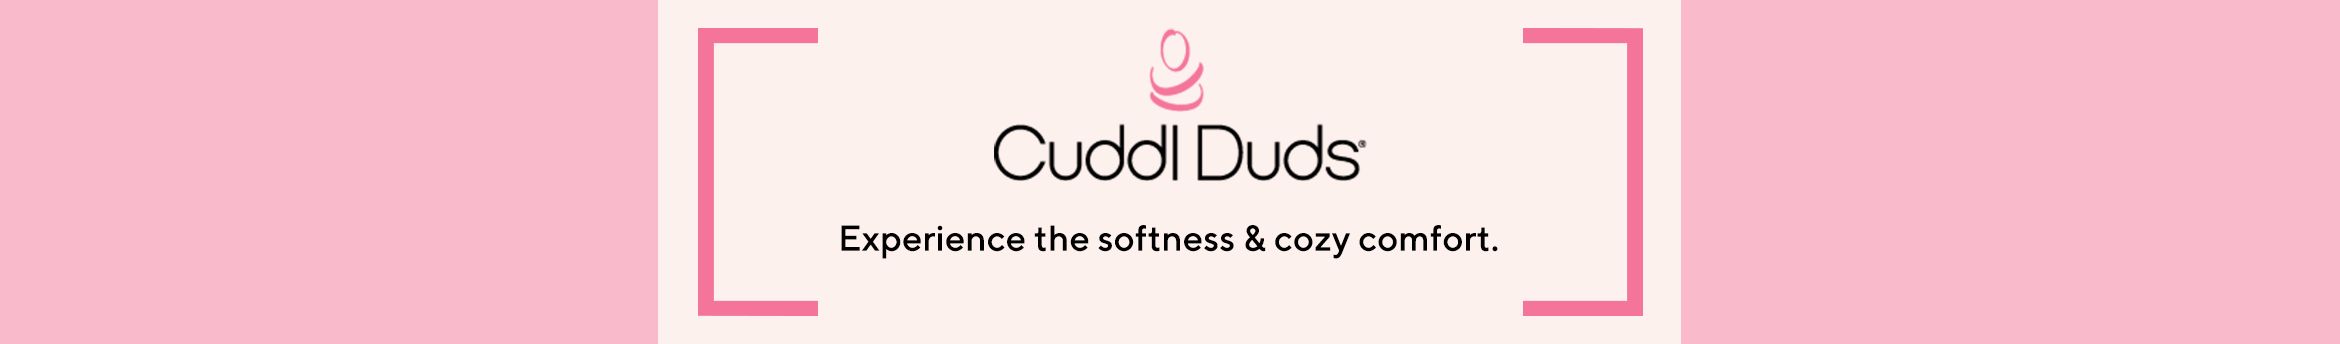 Cuddl Duds - Experience the softness & cozy comfort